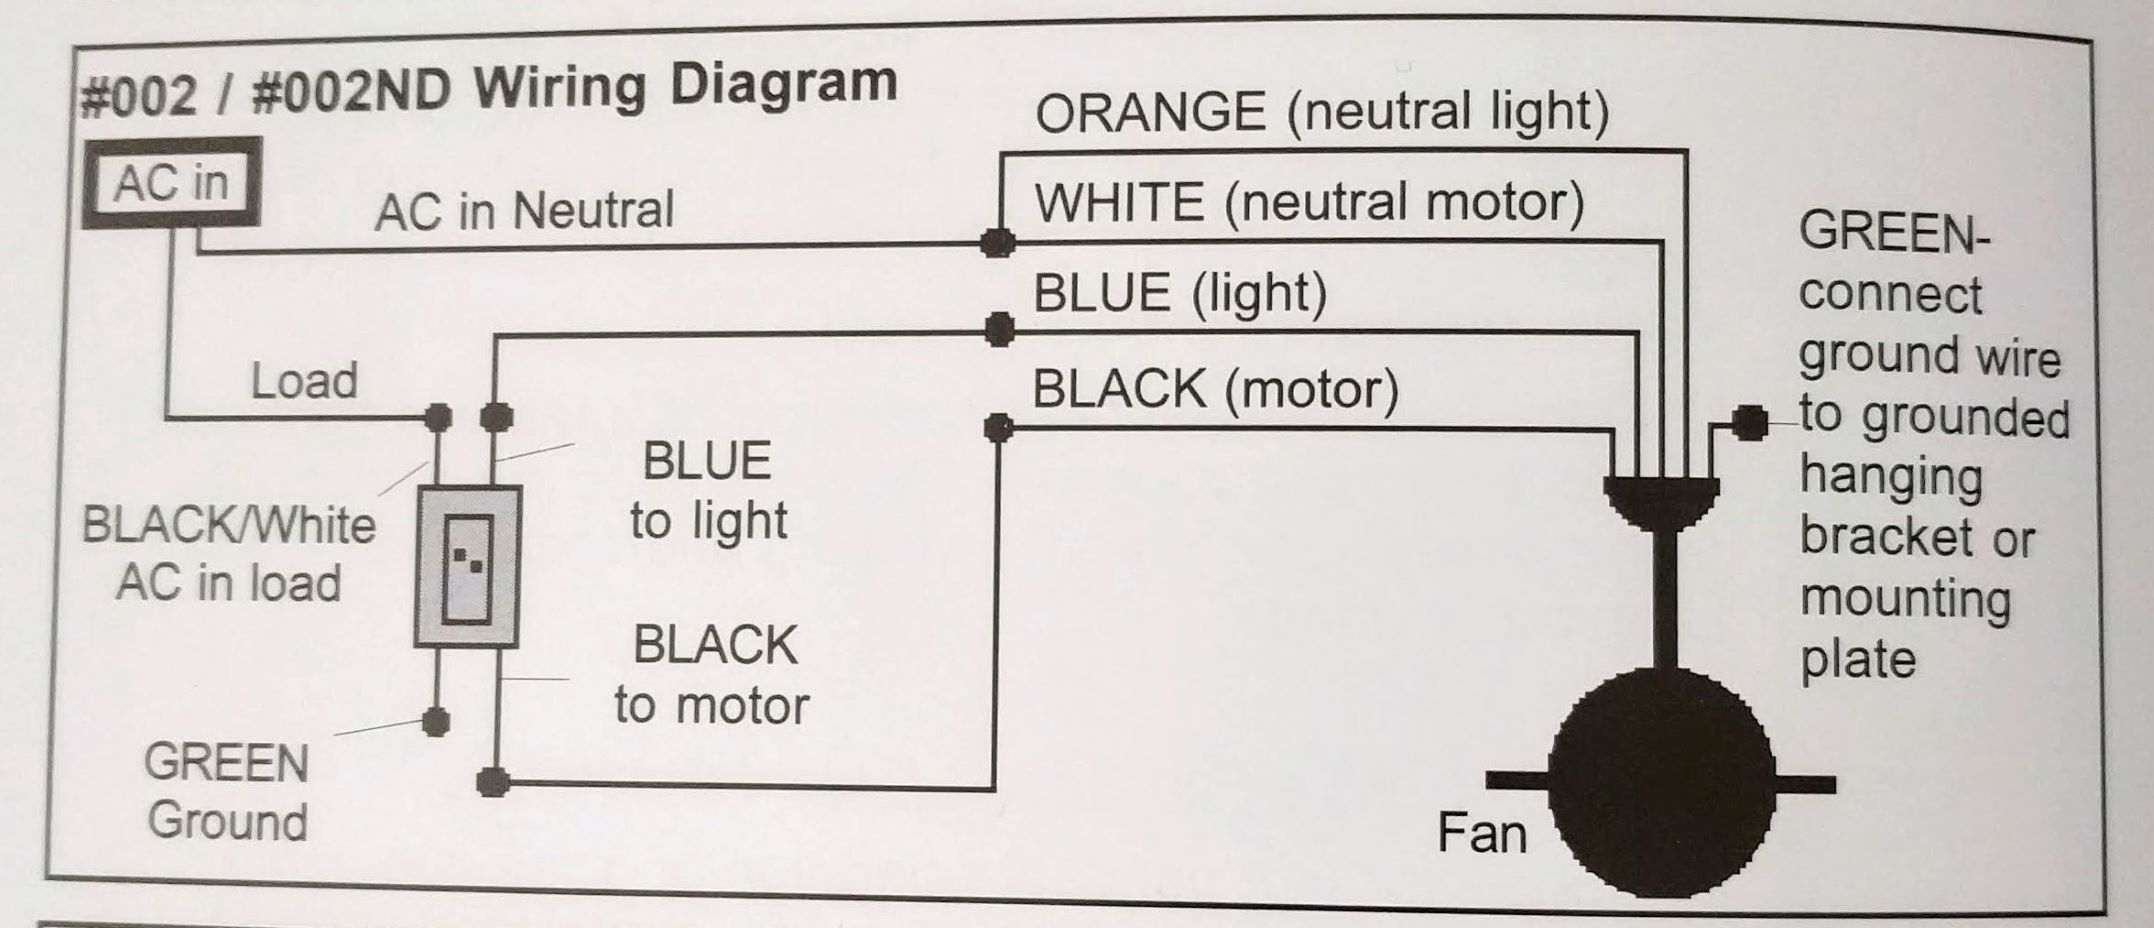 Wiring A Ceiling Fan With Black White Red Green In in dimensions 2154 X 928